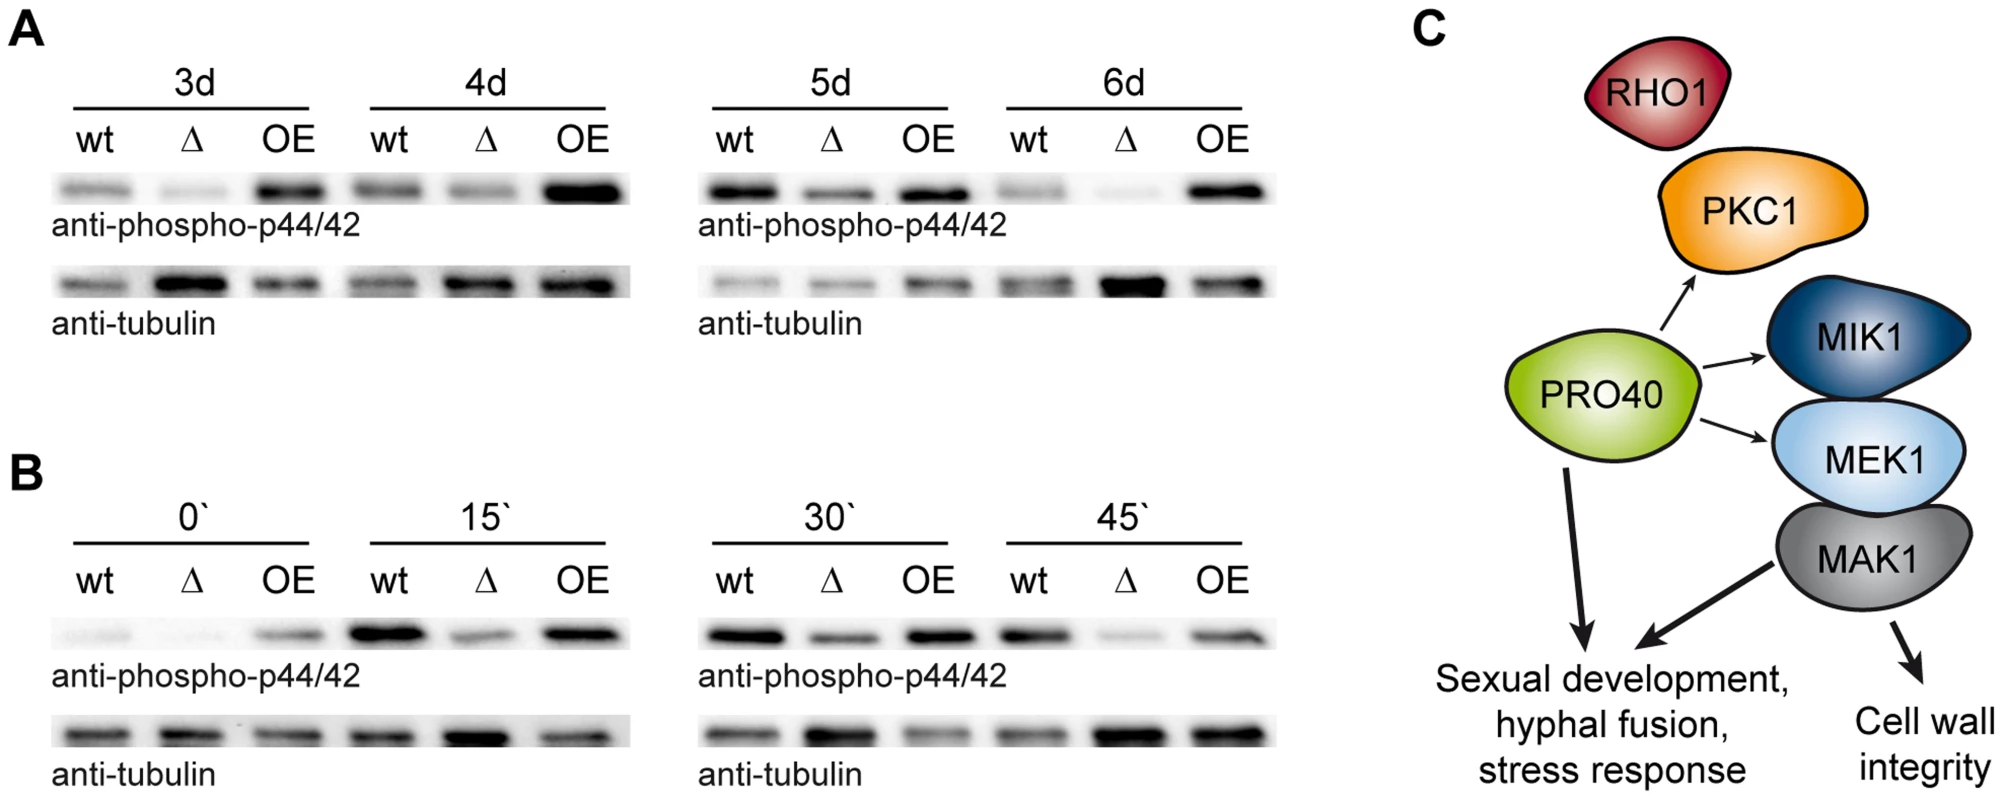 PRO40 is required for correct signaling via the CWI pathway.